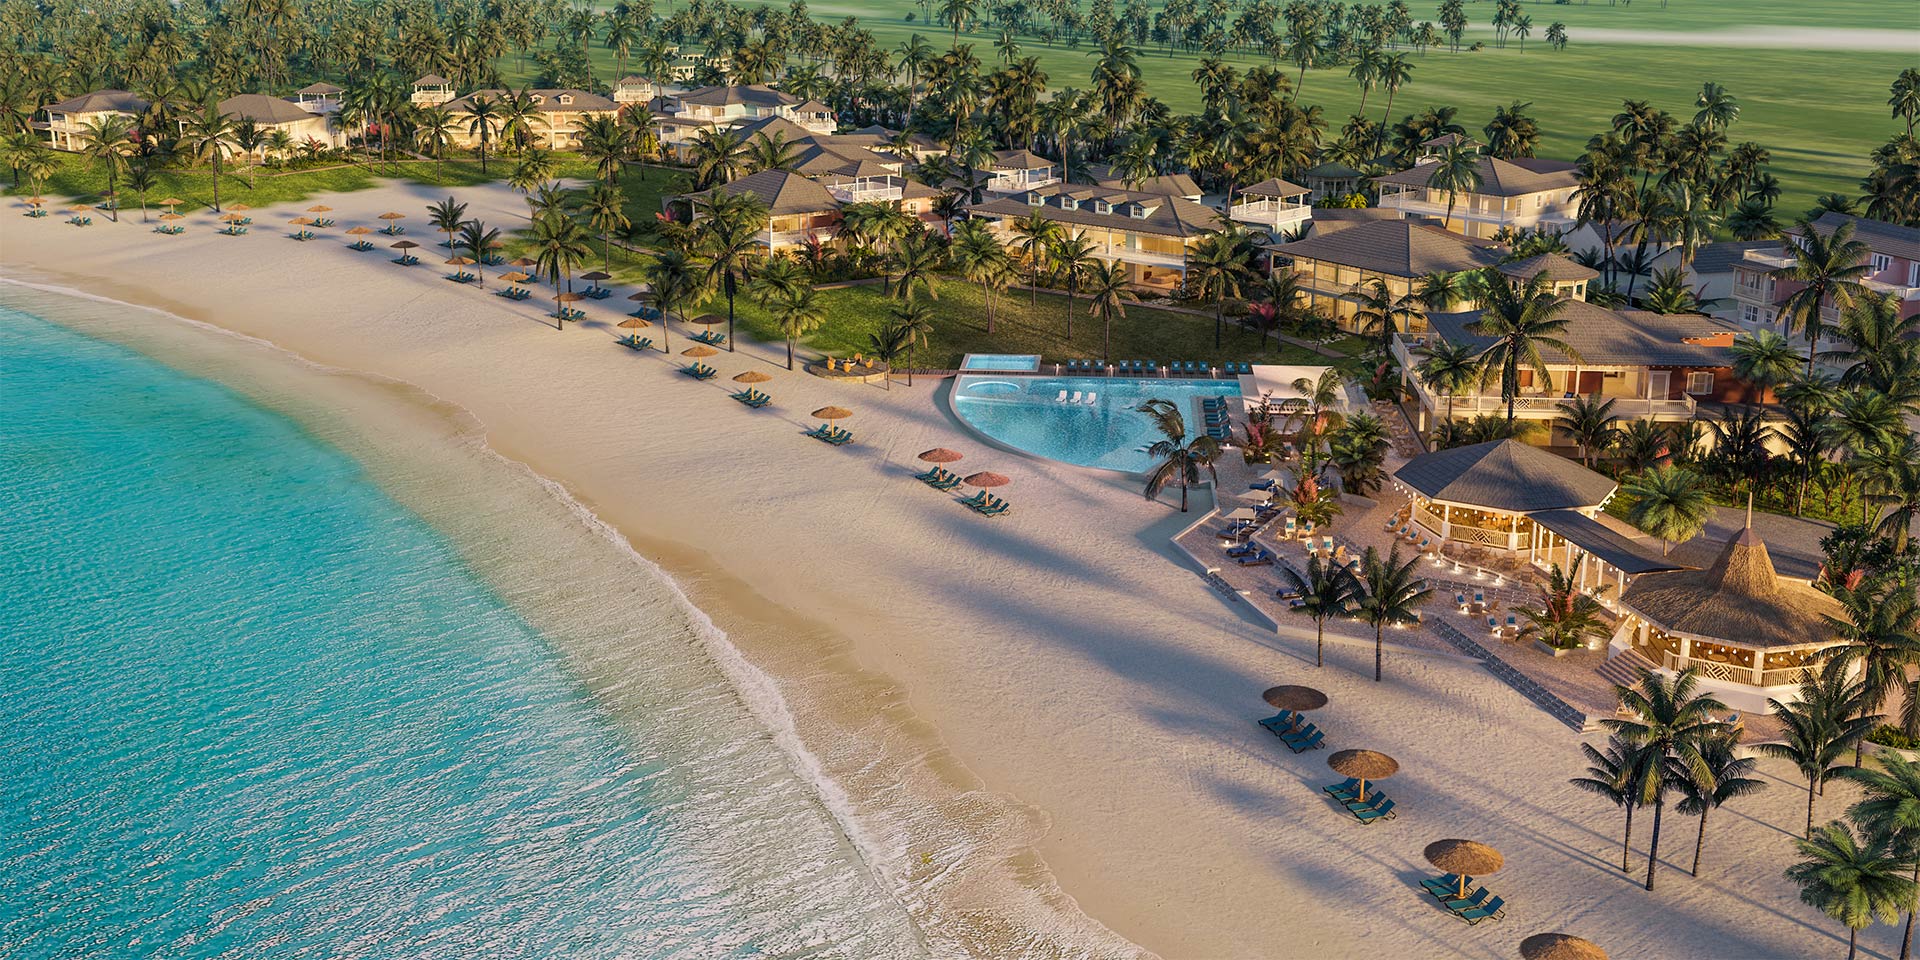 Panoramic view of The Abaco Club's luxury beachfront villas, a paradise for coastal living and a haven for a sophisticated club lifestyle in The Bahamas.